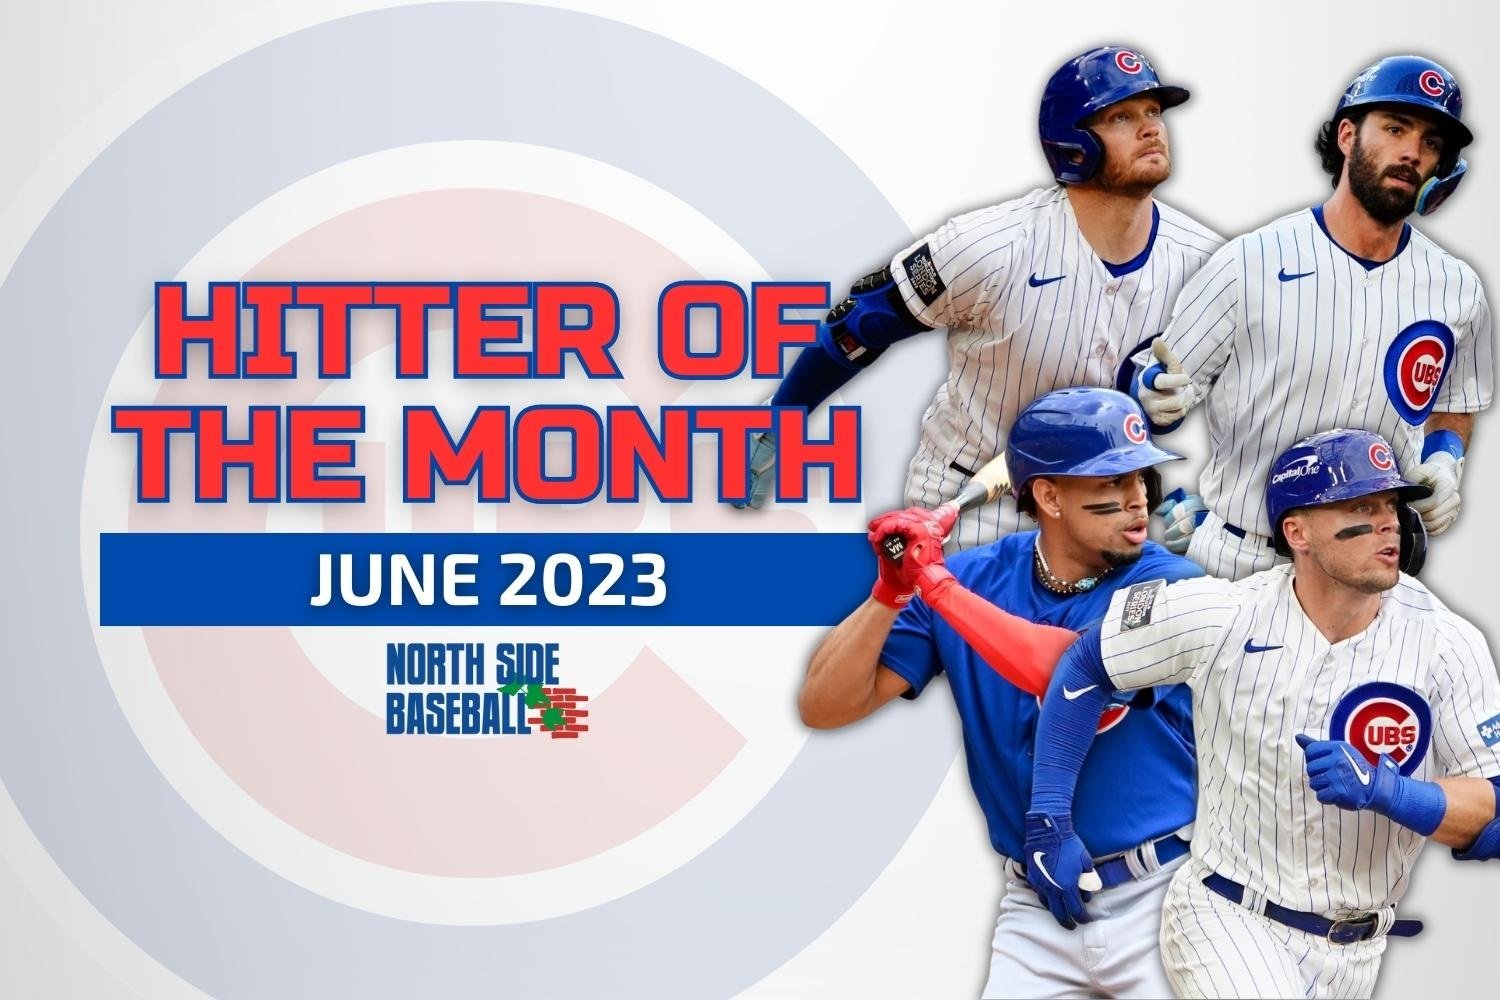 Cubs Hitter of the Month - June 2023 - Cubs - North Side Baseball